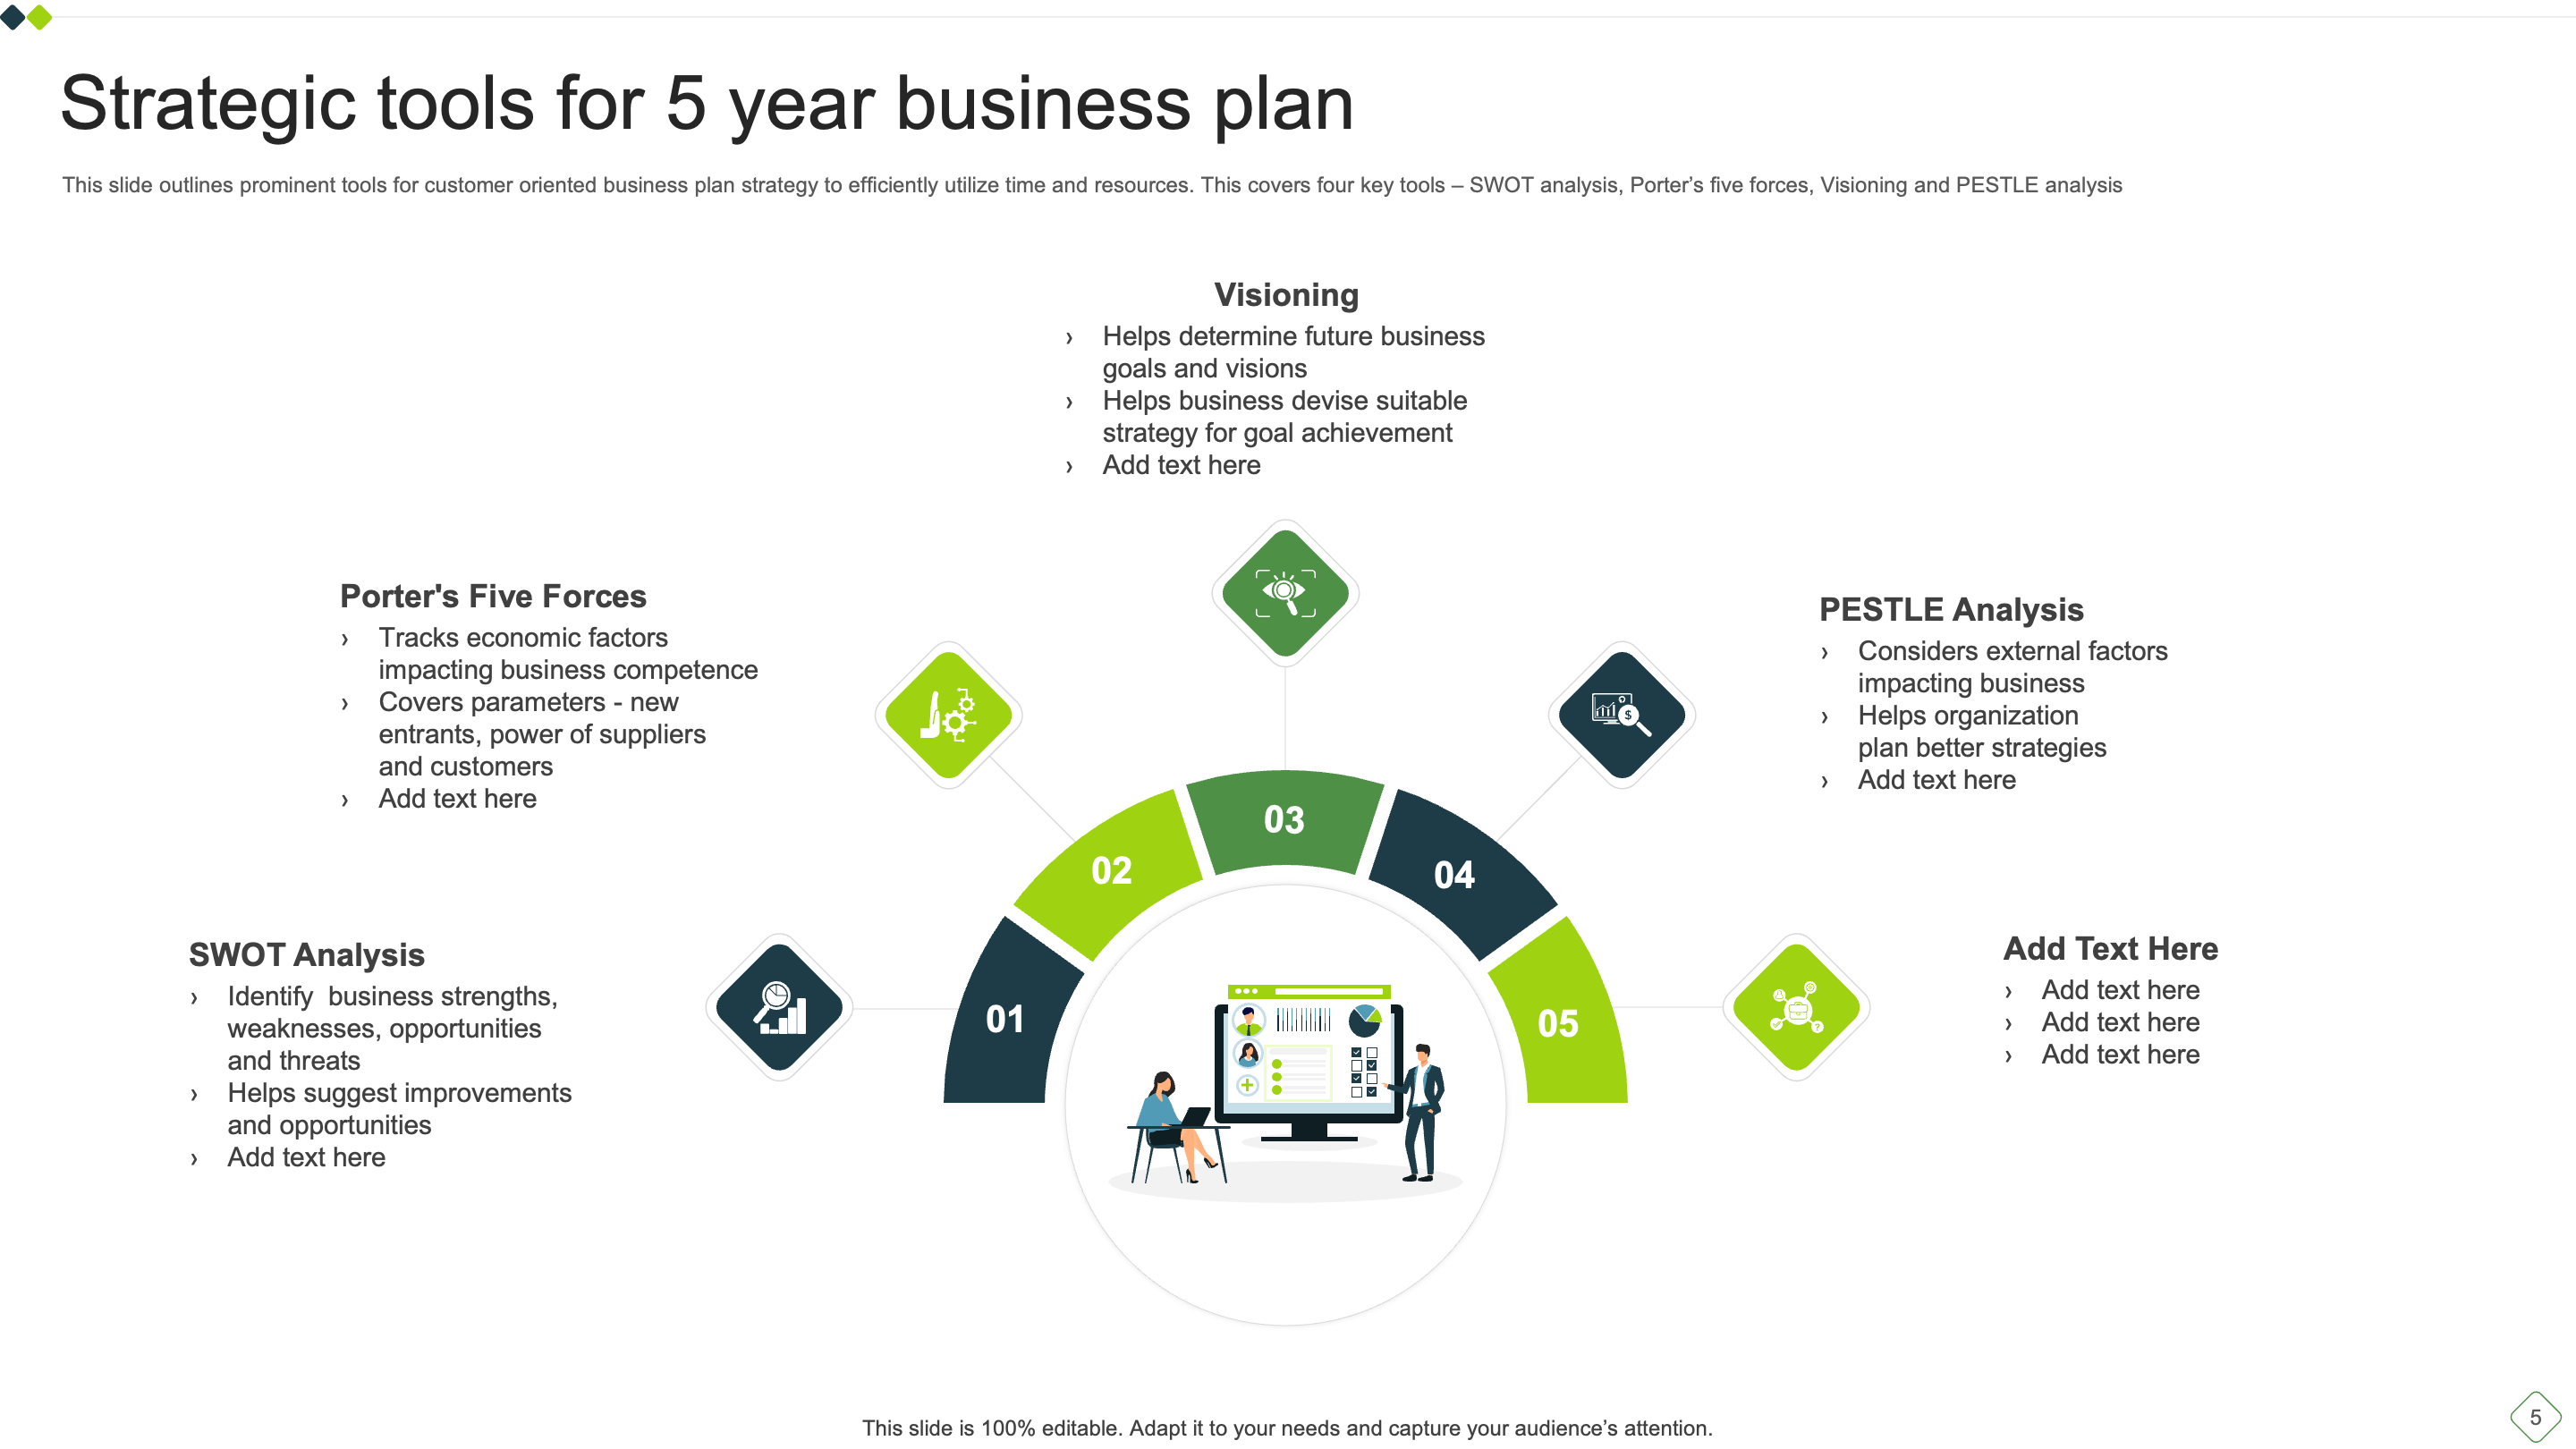 Strategic Tools for 5 Year Business Plan